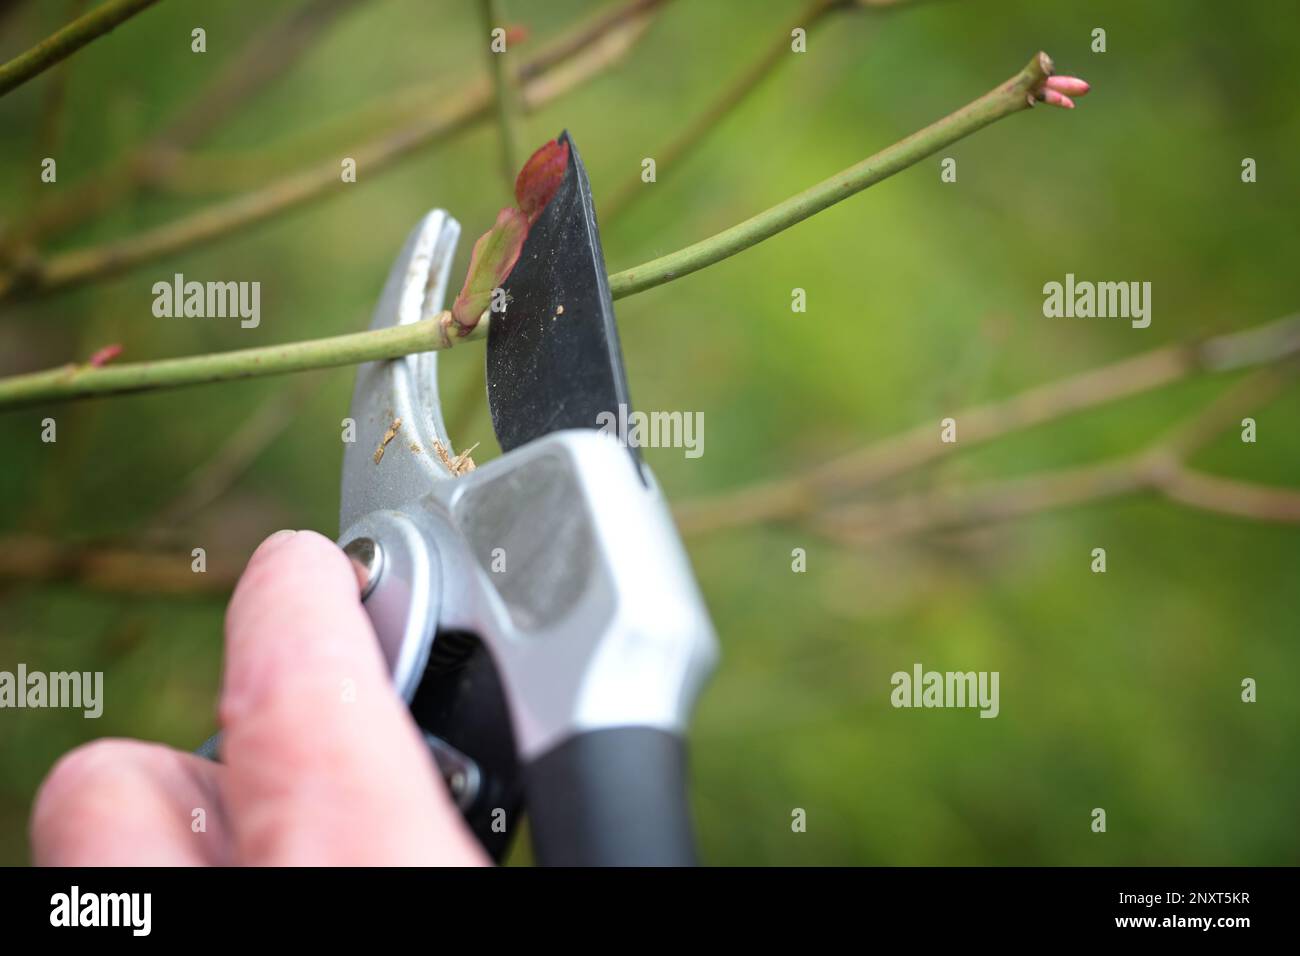 Rose pruning in spring, cutting a twig above a shoot bud with pruning shears, seasonal gardening, natural green background, copy space, selected focus Stock Photo